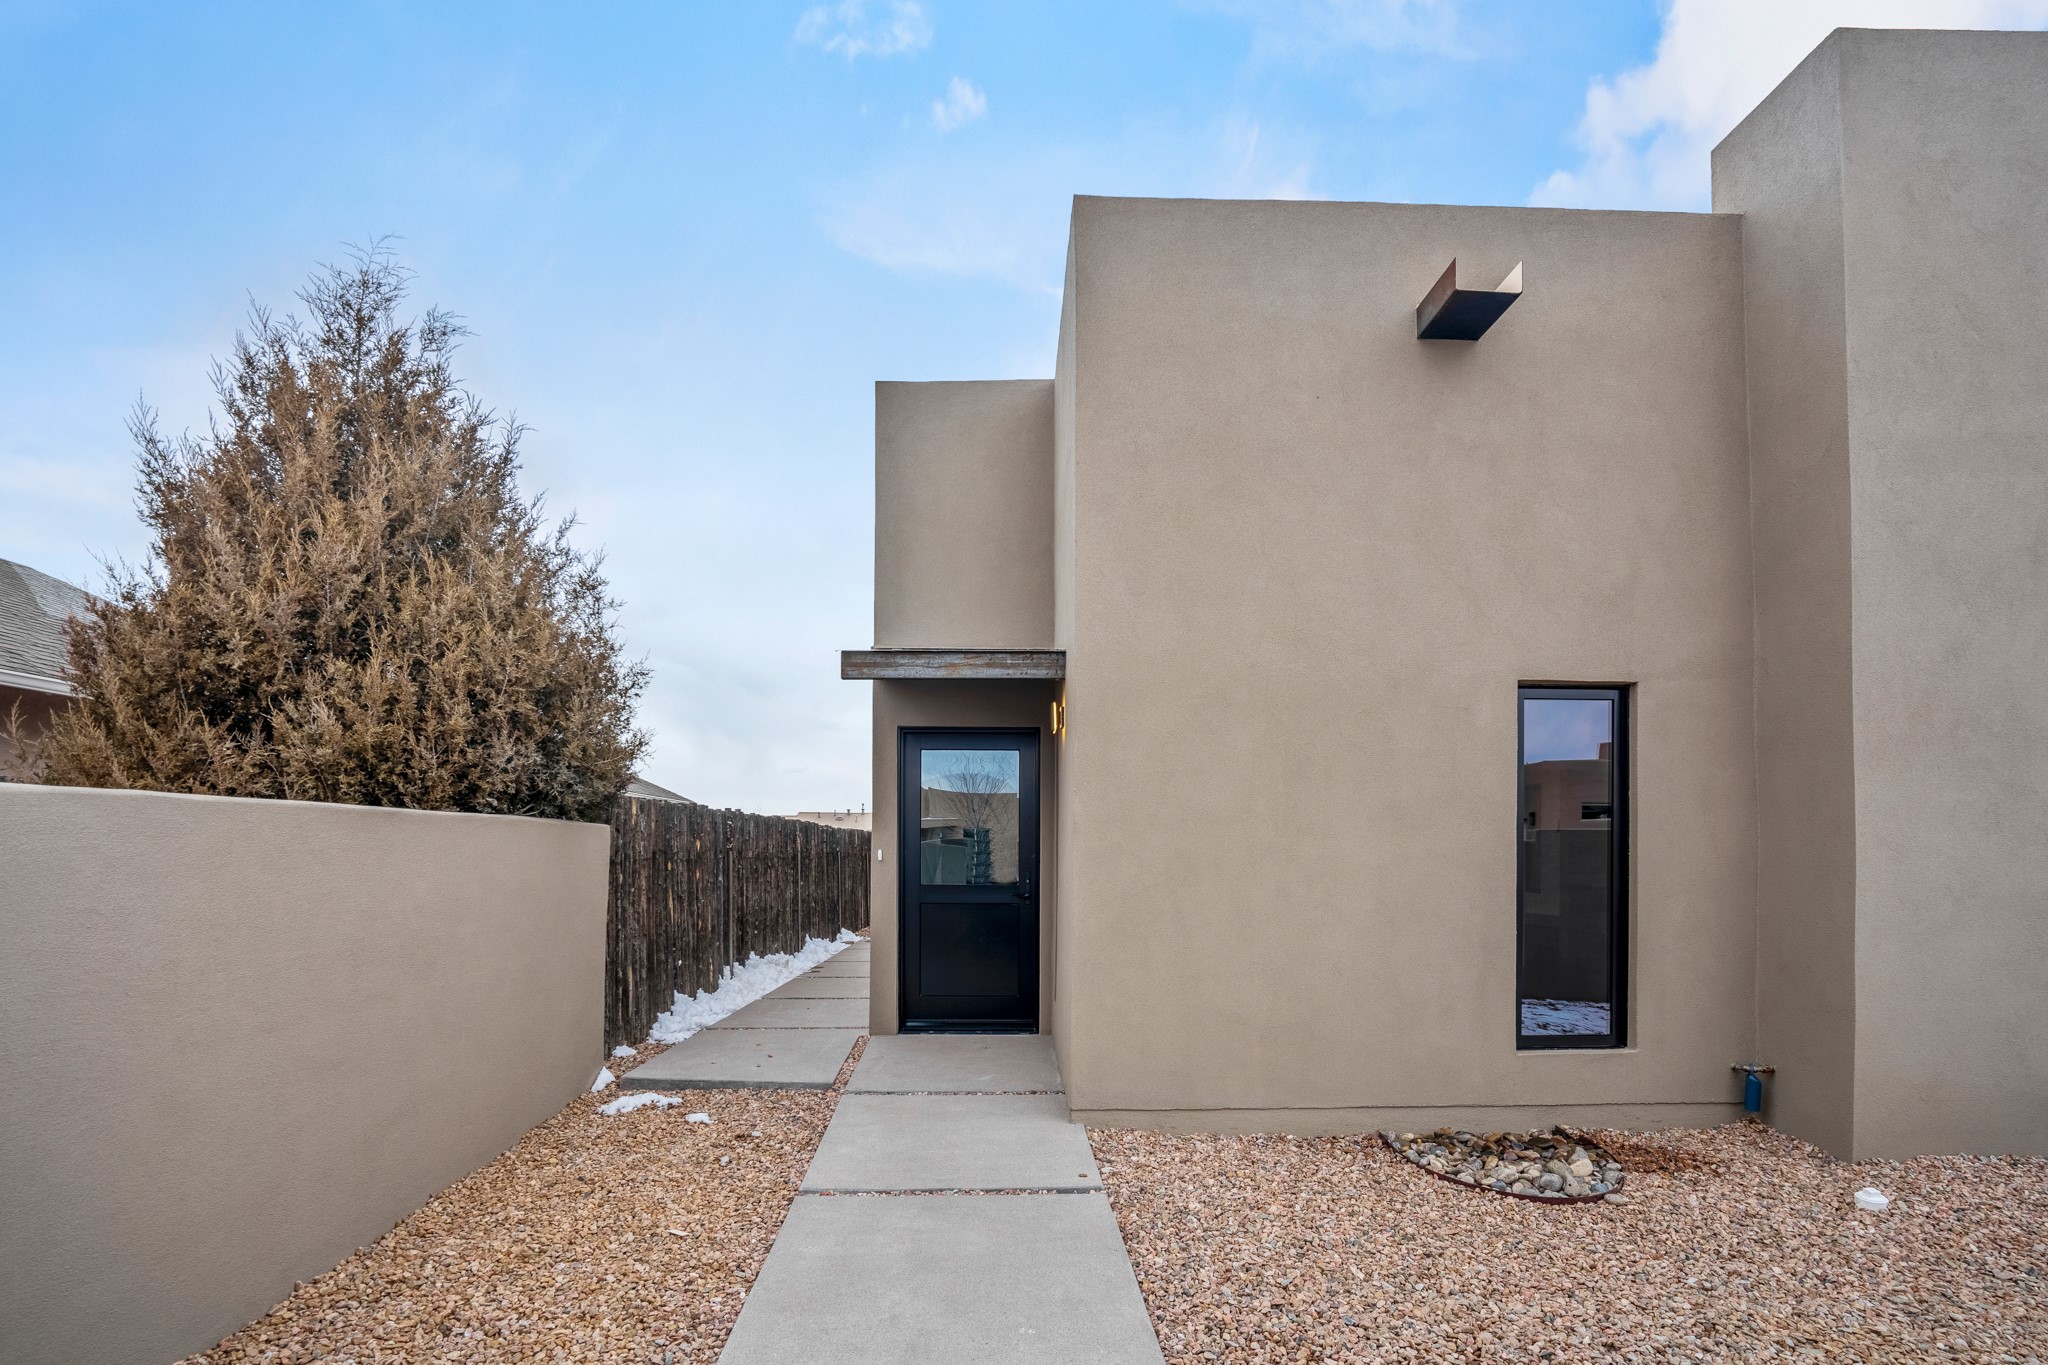 31 Willow Back Road, Santa Fe, New Mexico 87508, 3 Bedrooms Bedrooms, ,3 BathroomsBathrooms,Residential,For Sale,31 Willow Back Road,202232813